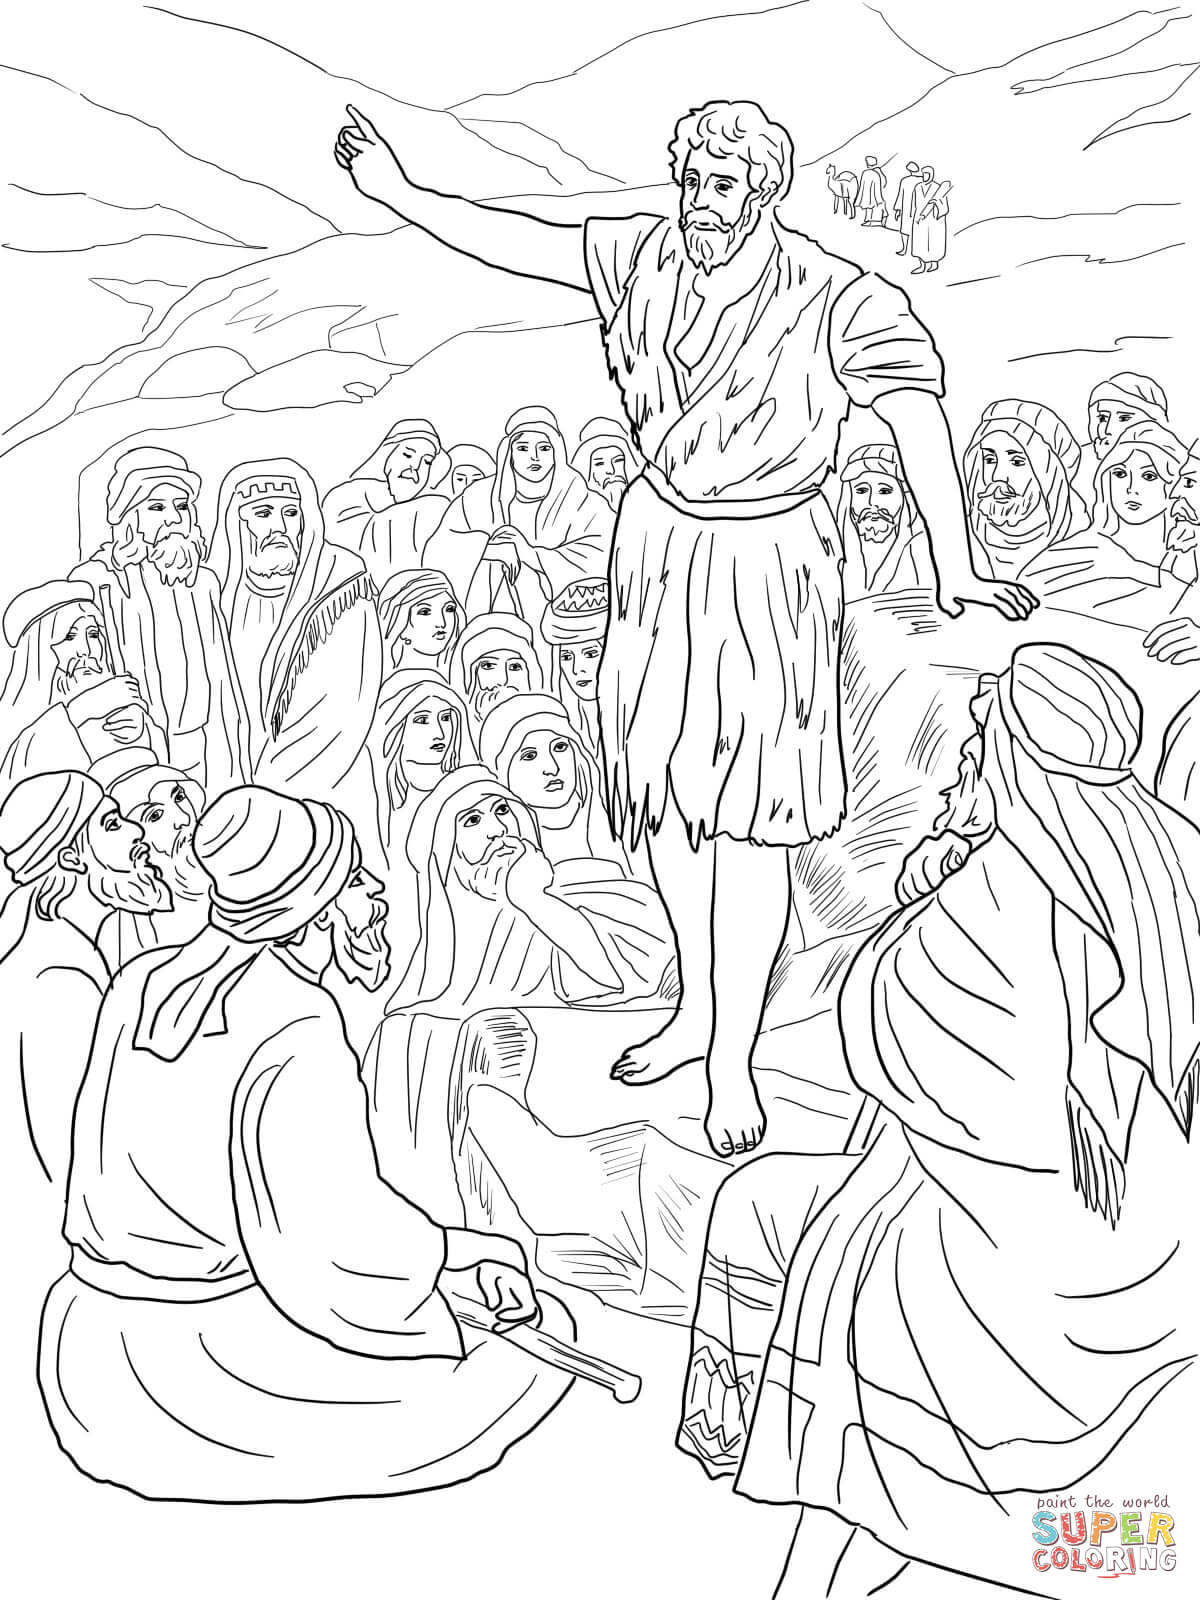 Zechariah, Elizabeth and Baby John the Baptist coloring page ...